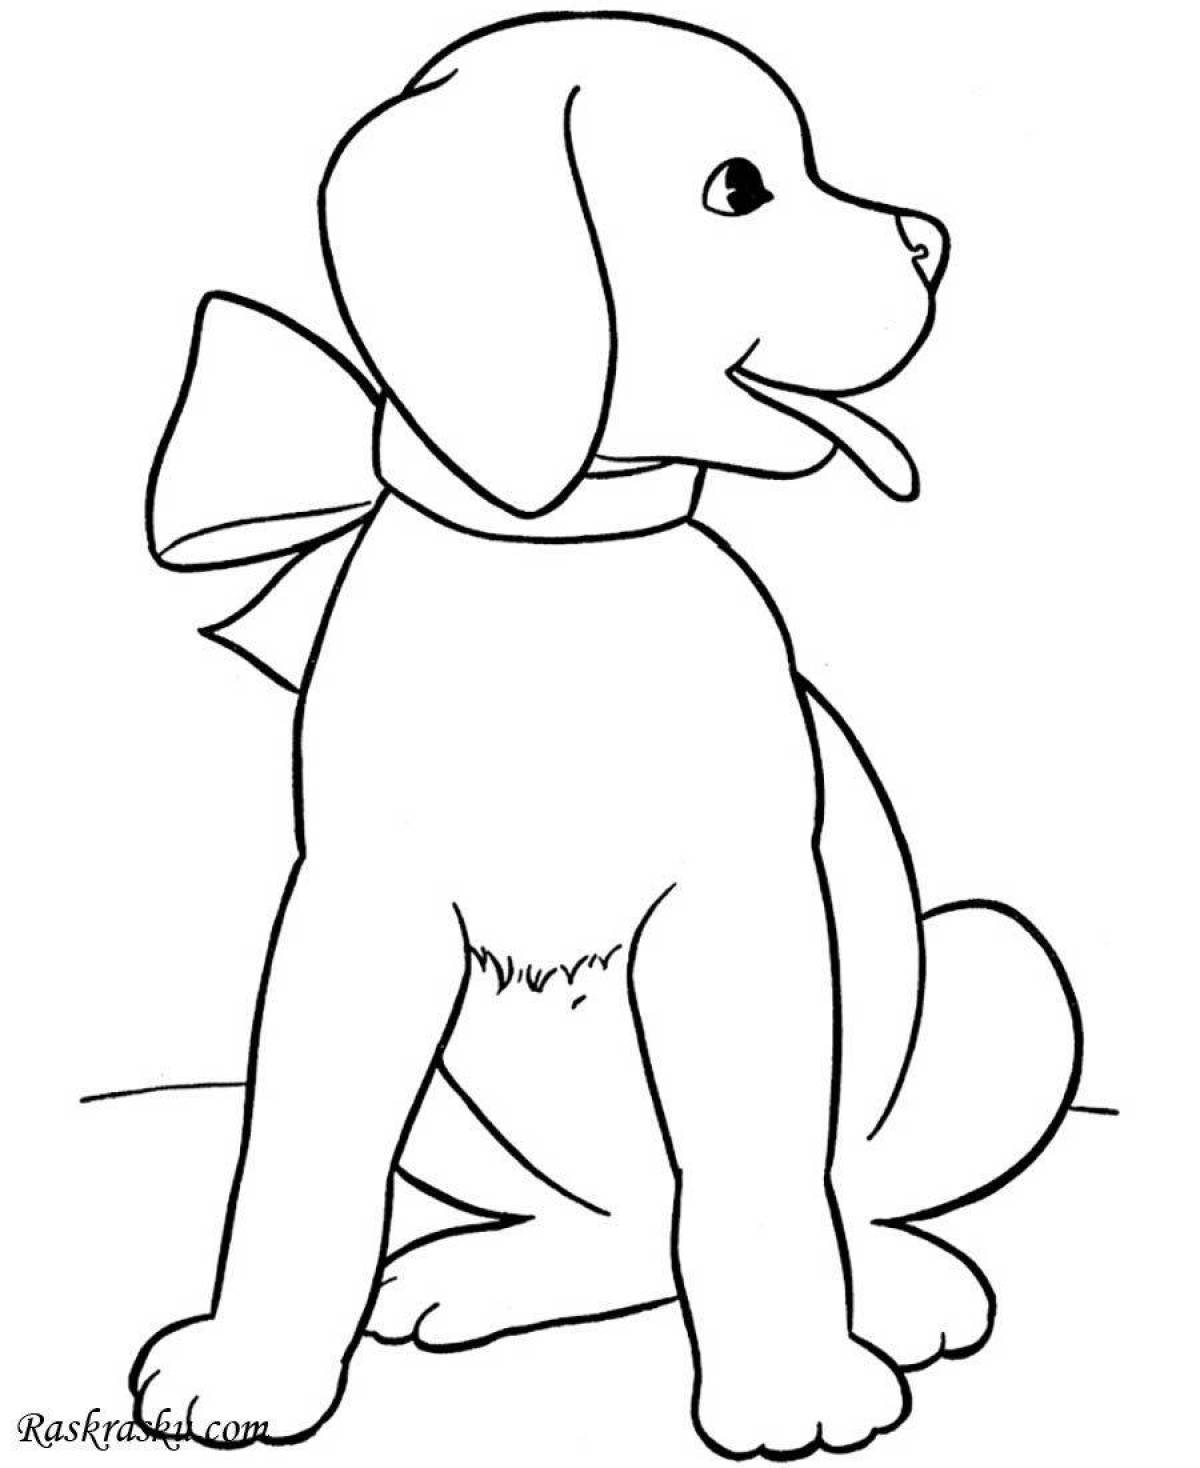 Fluffy puppy coloring book